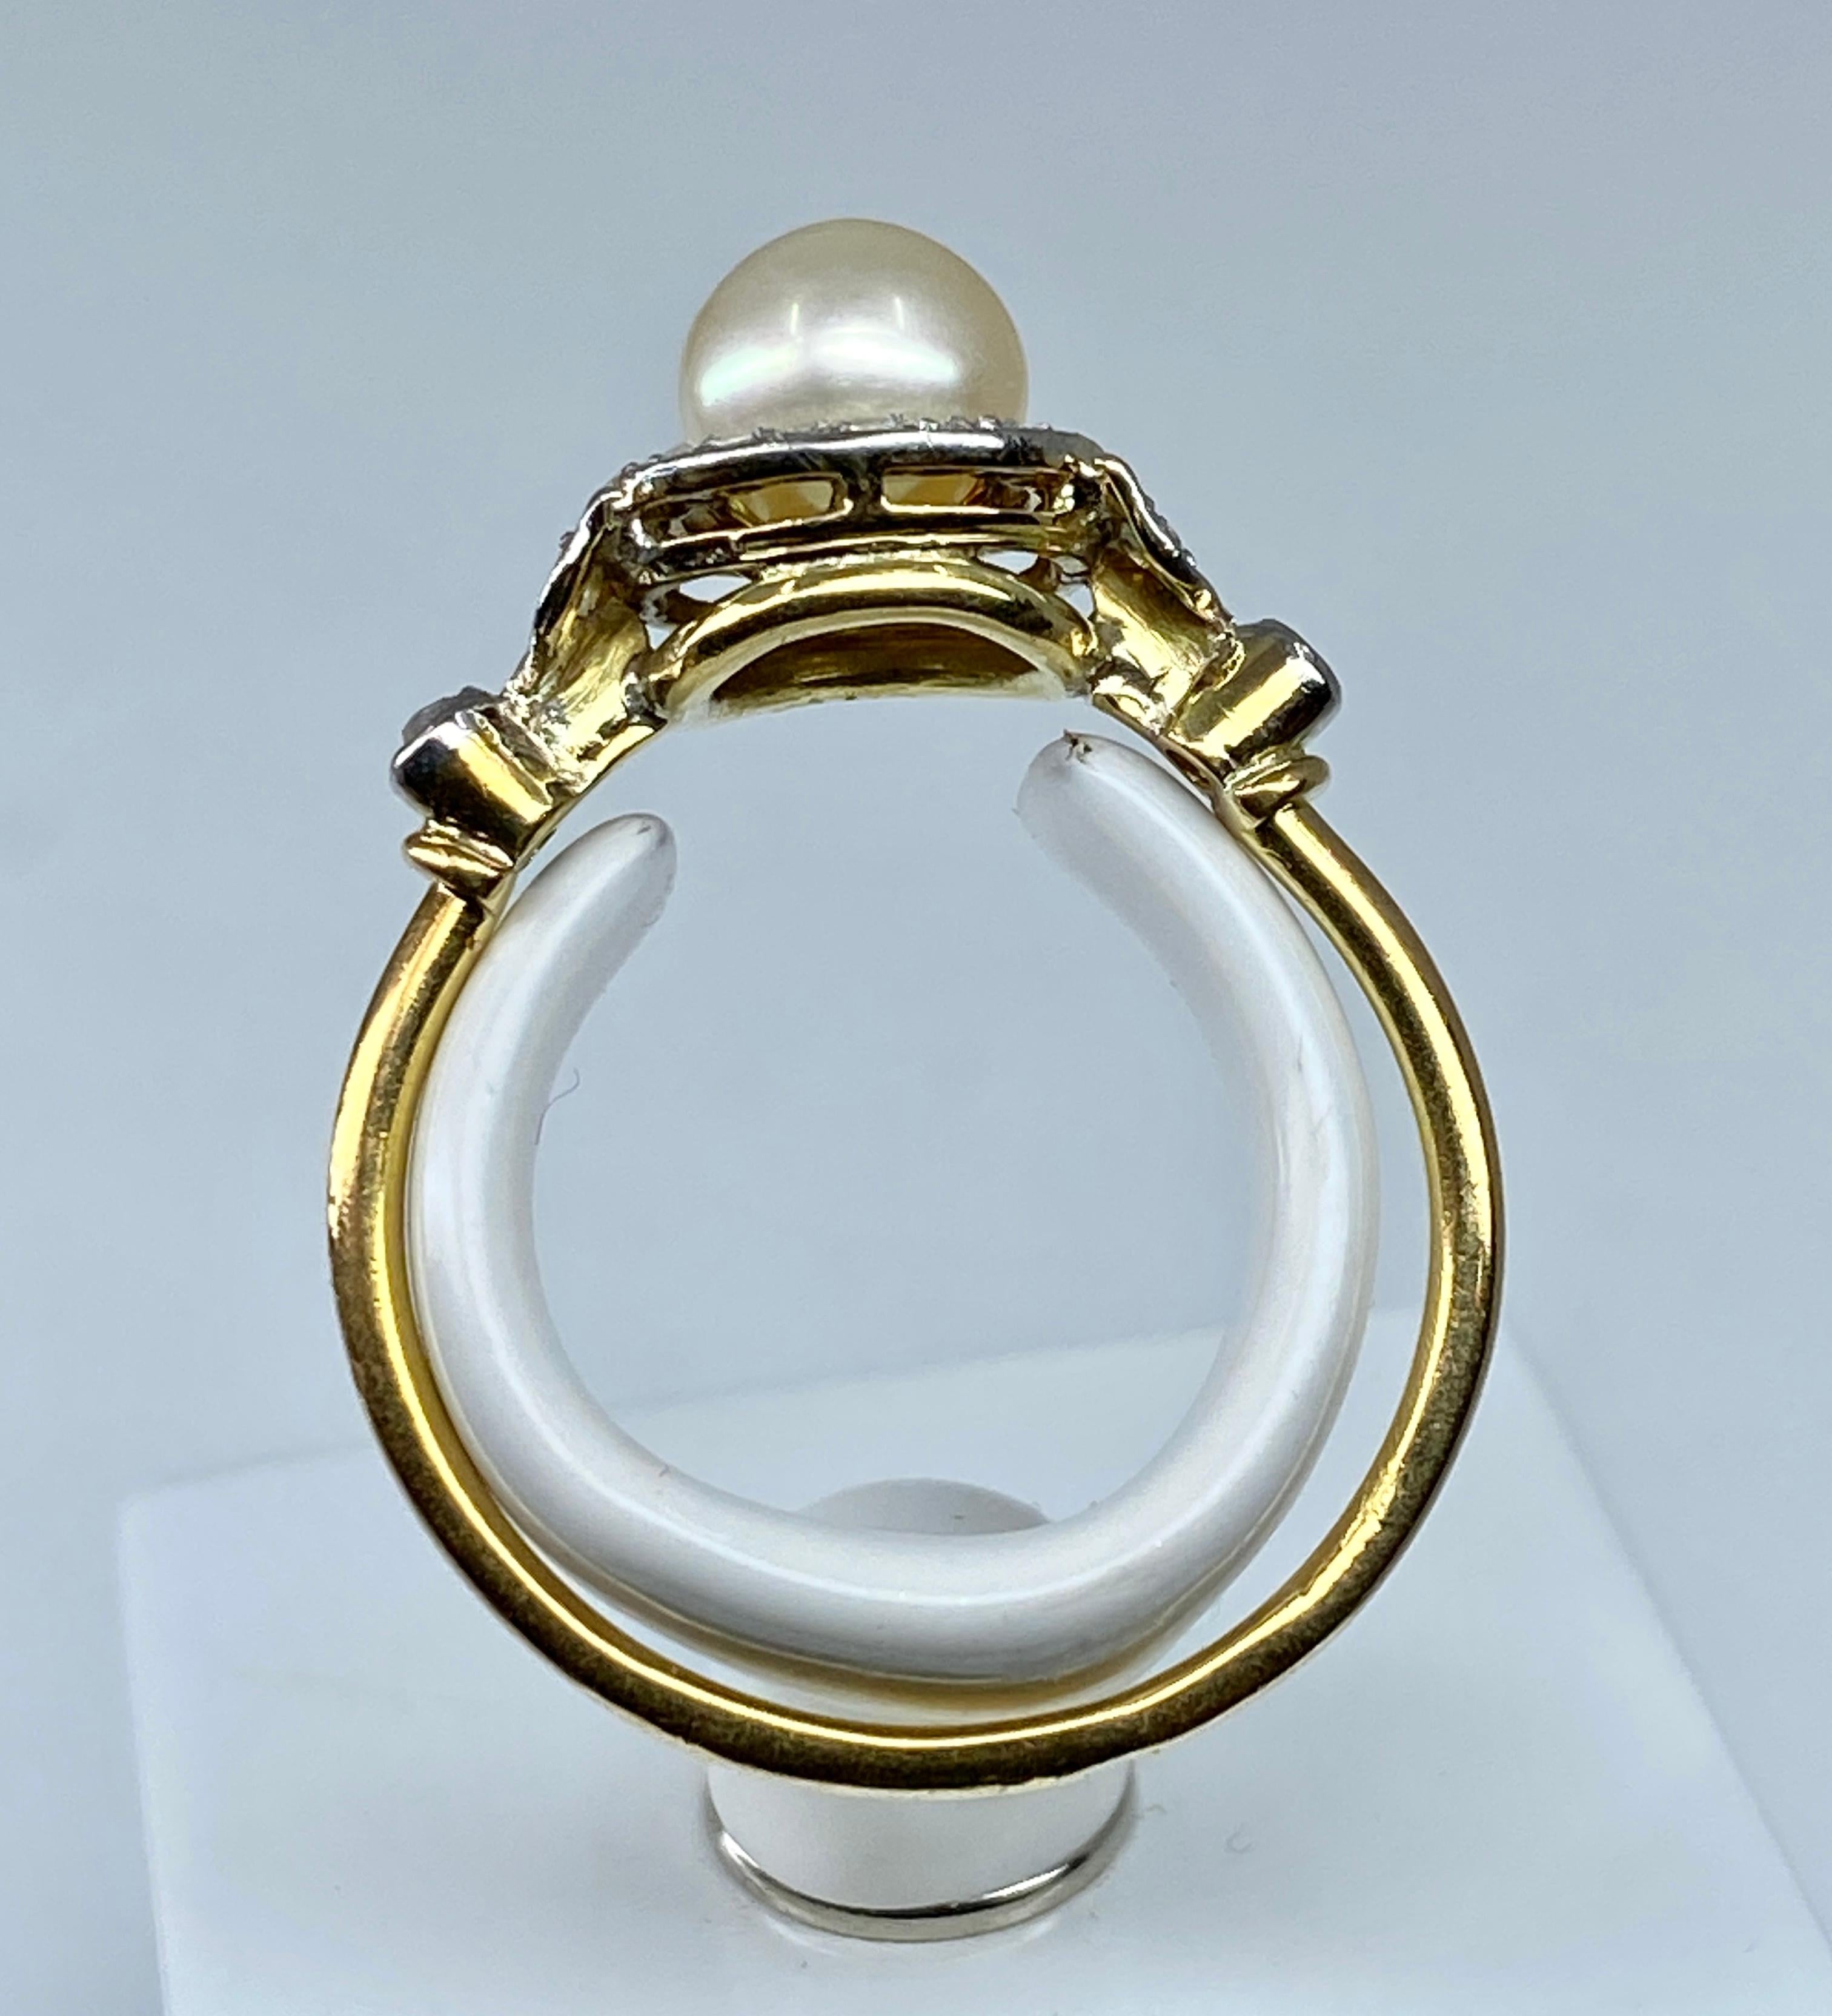 Round Cut 18 carat gold ring set with a pearl and diamonds, 1900 period. For Sale